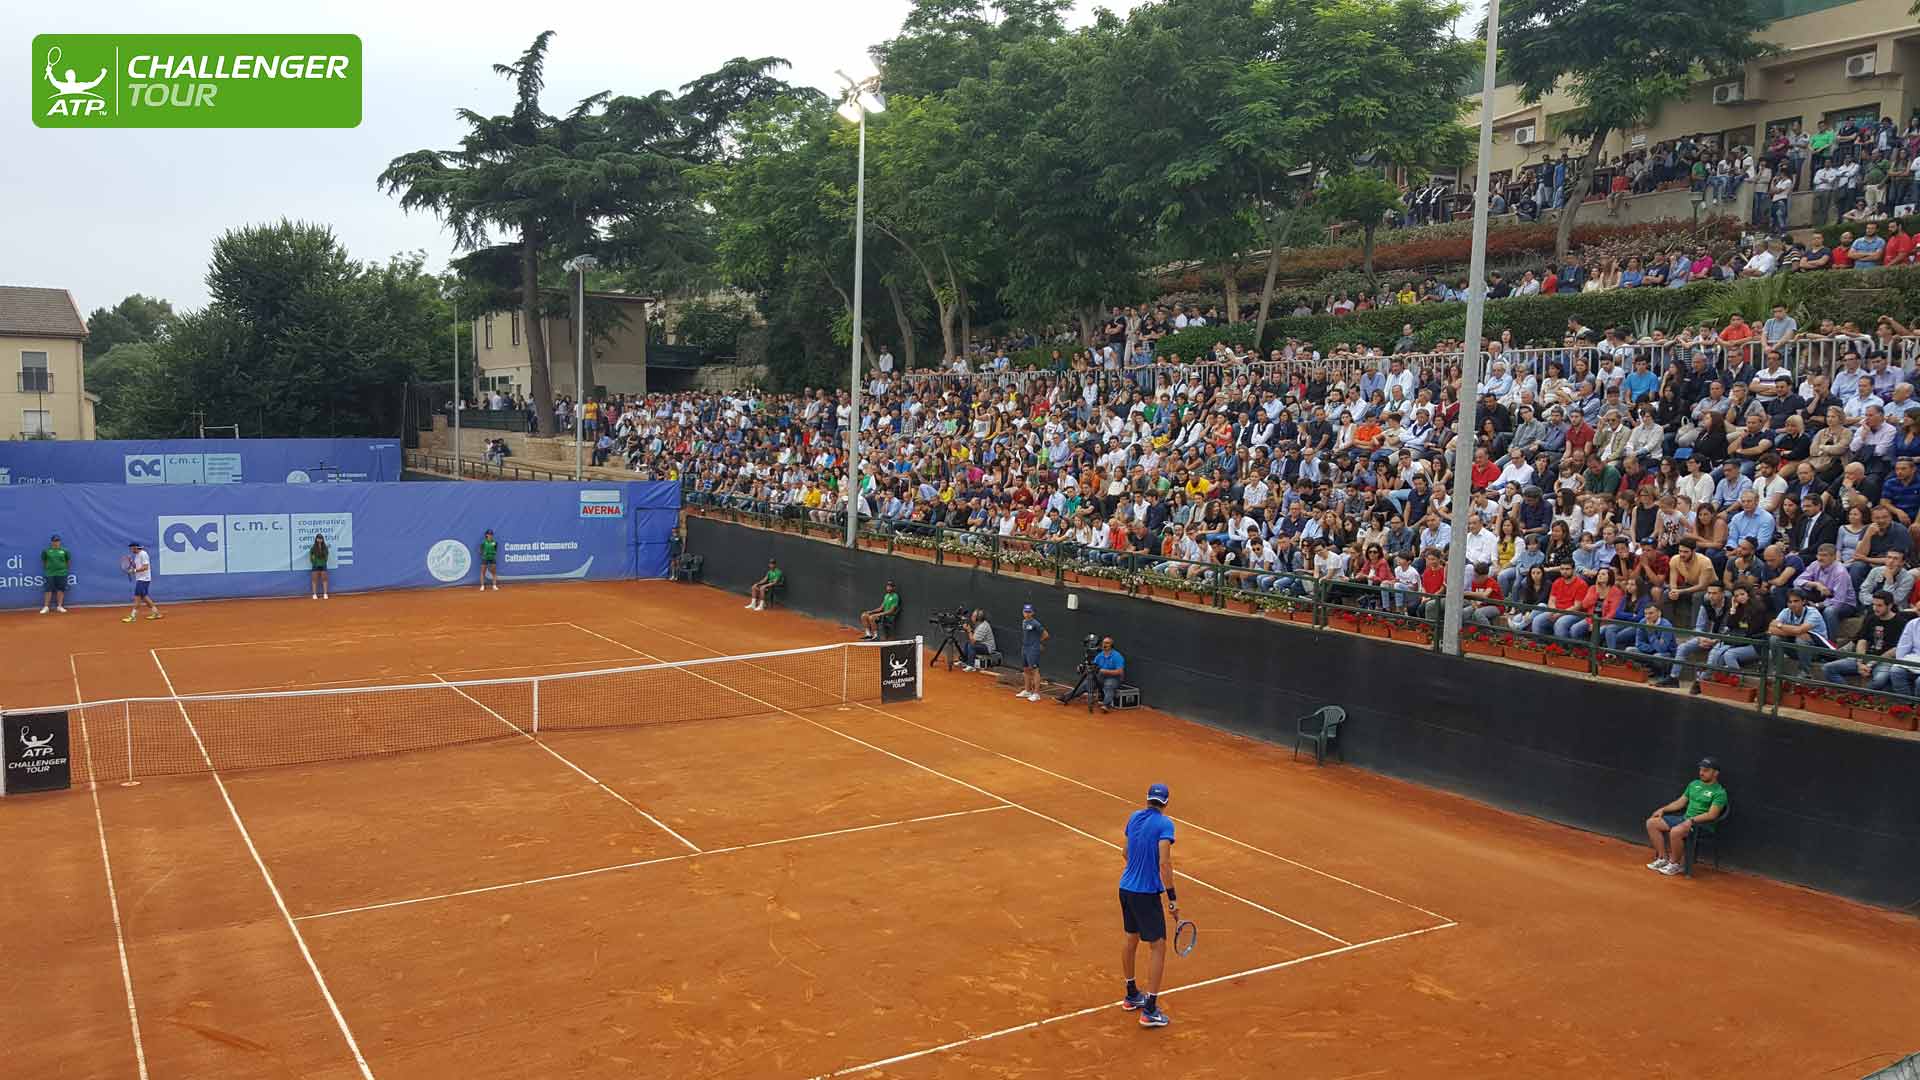 Packed crowds watch the matches in Caltanissetta.